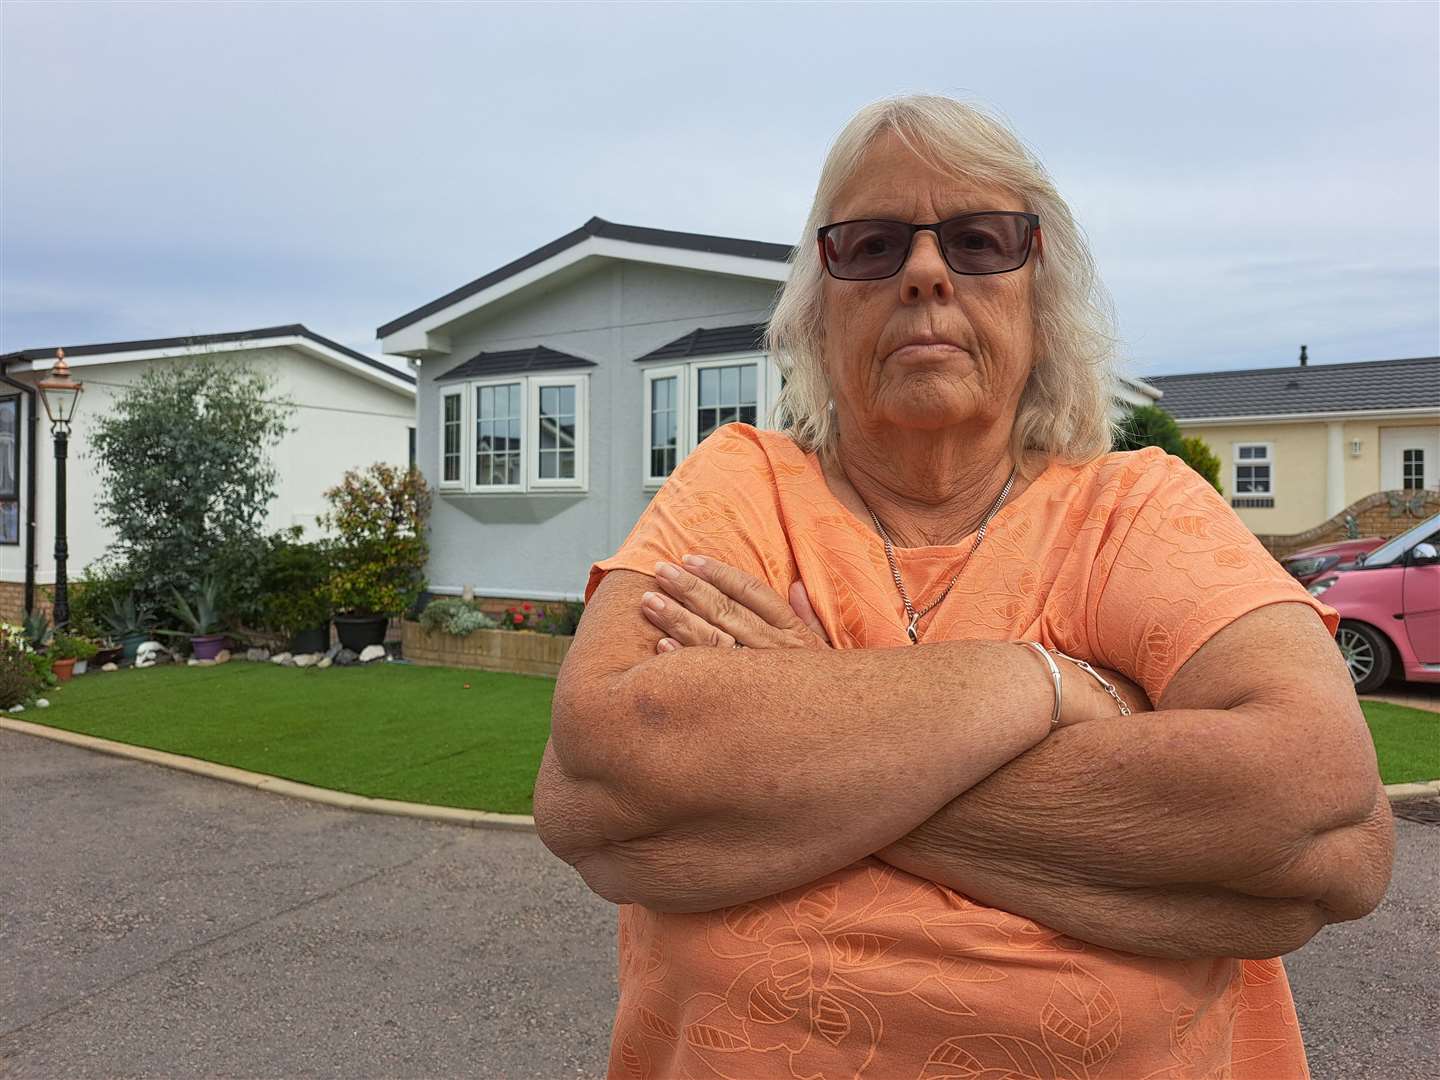 Christine Price, who lives in RoyaleLife's Reculver Court, says she just wants what she paid for